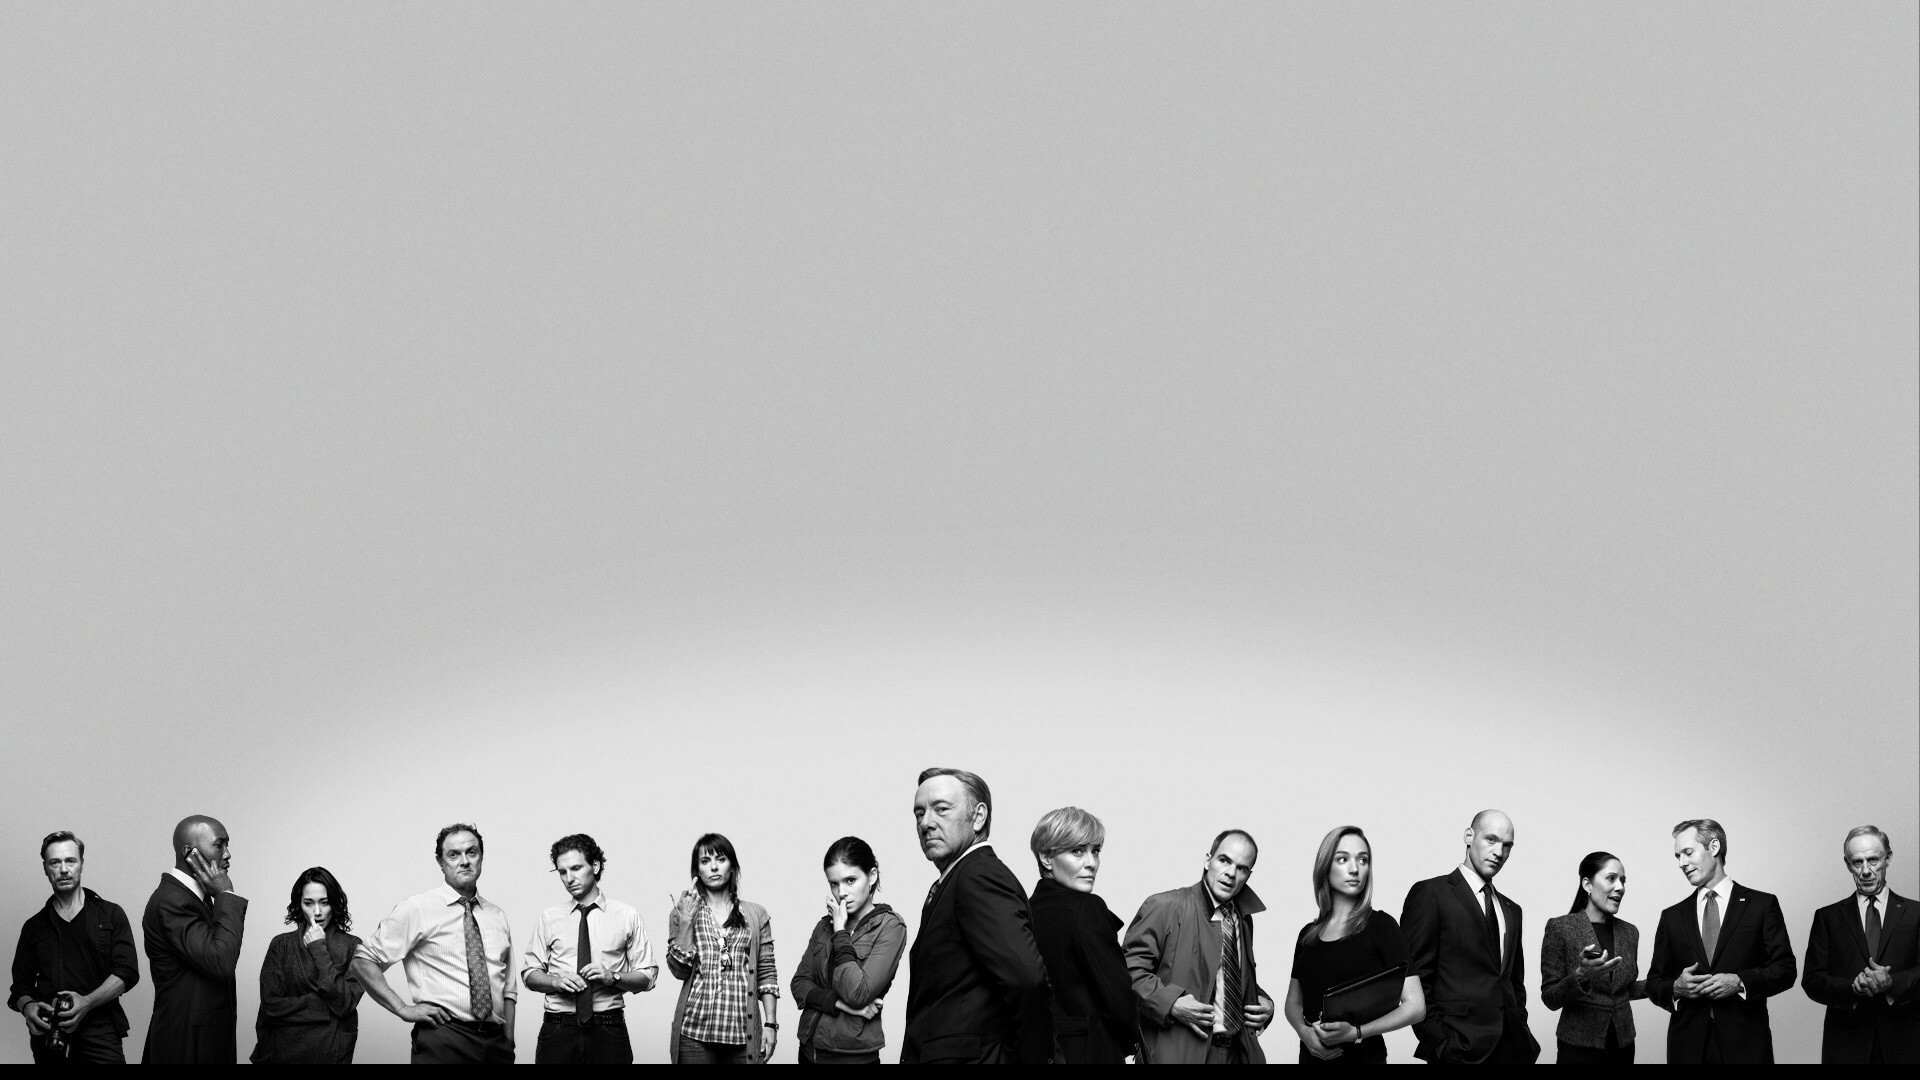 House of Cards: The series received 33 Primetime Emmy Award nominations. 1920x1080 Full HD Wallpaper.